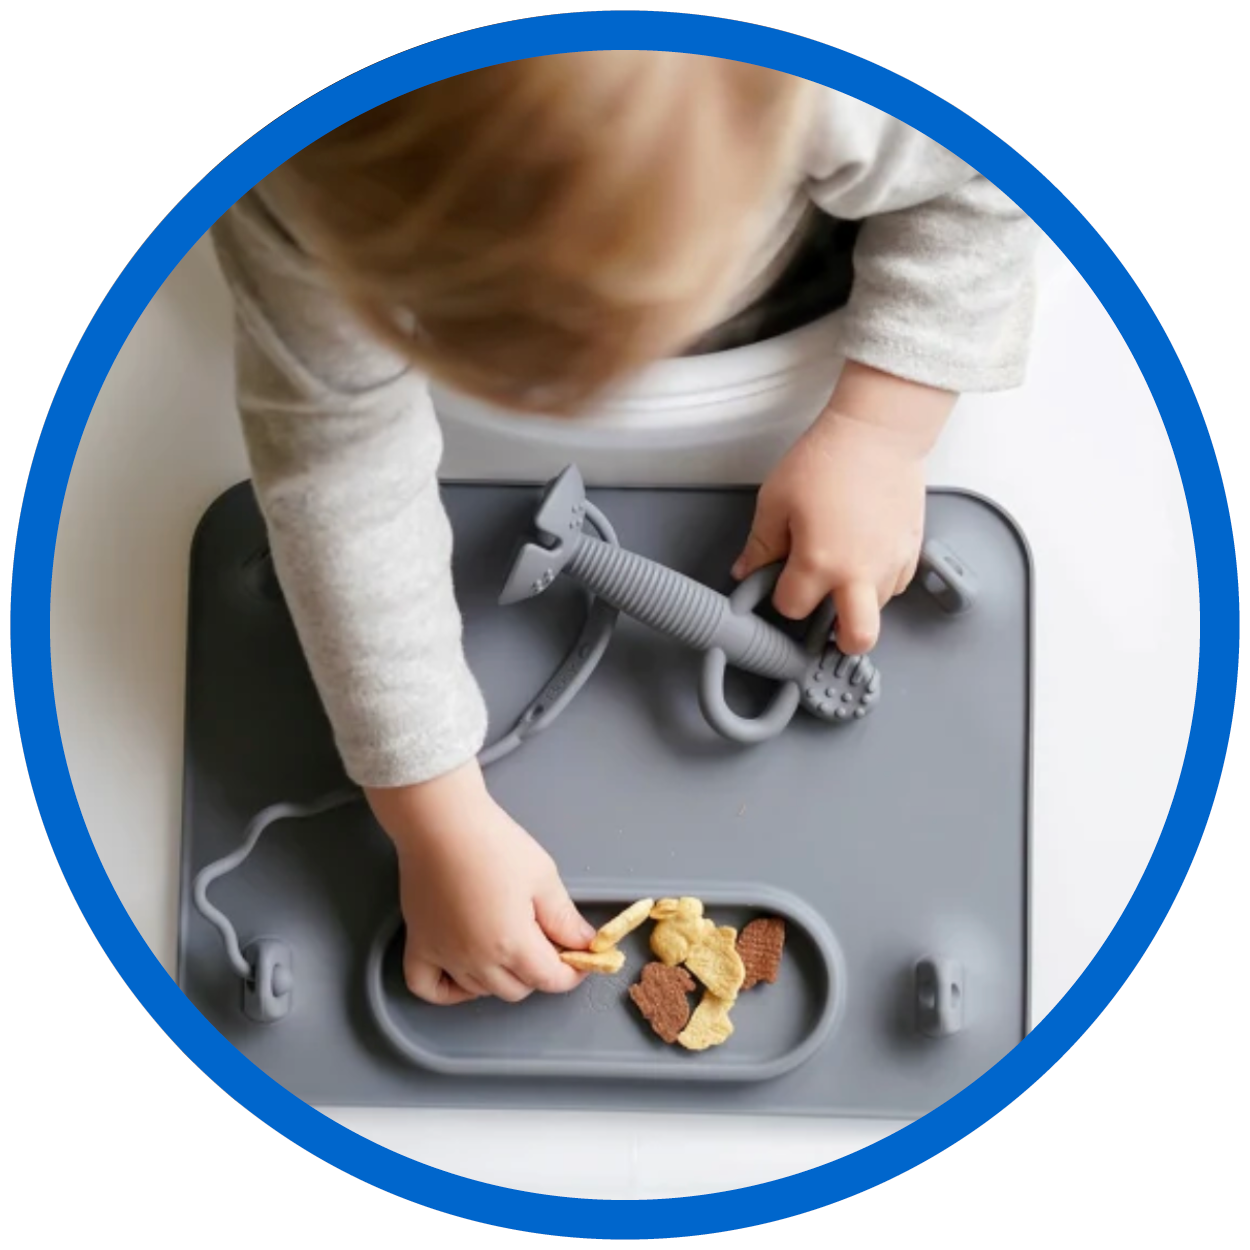 Grey Busy Baby Mat with toddler playing with utensils.